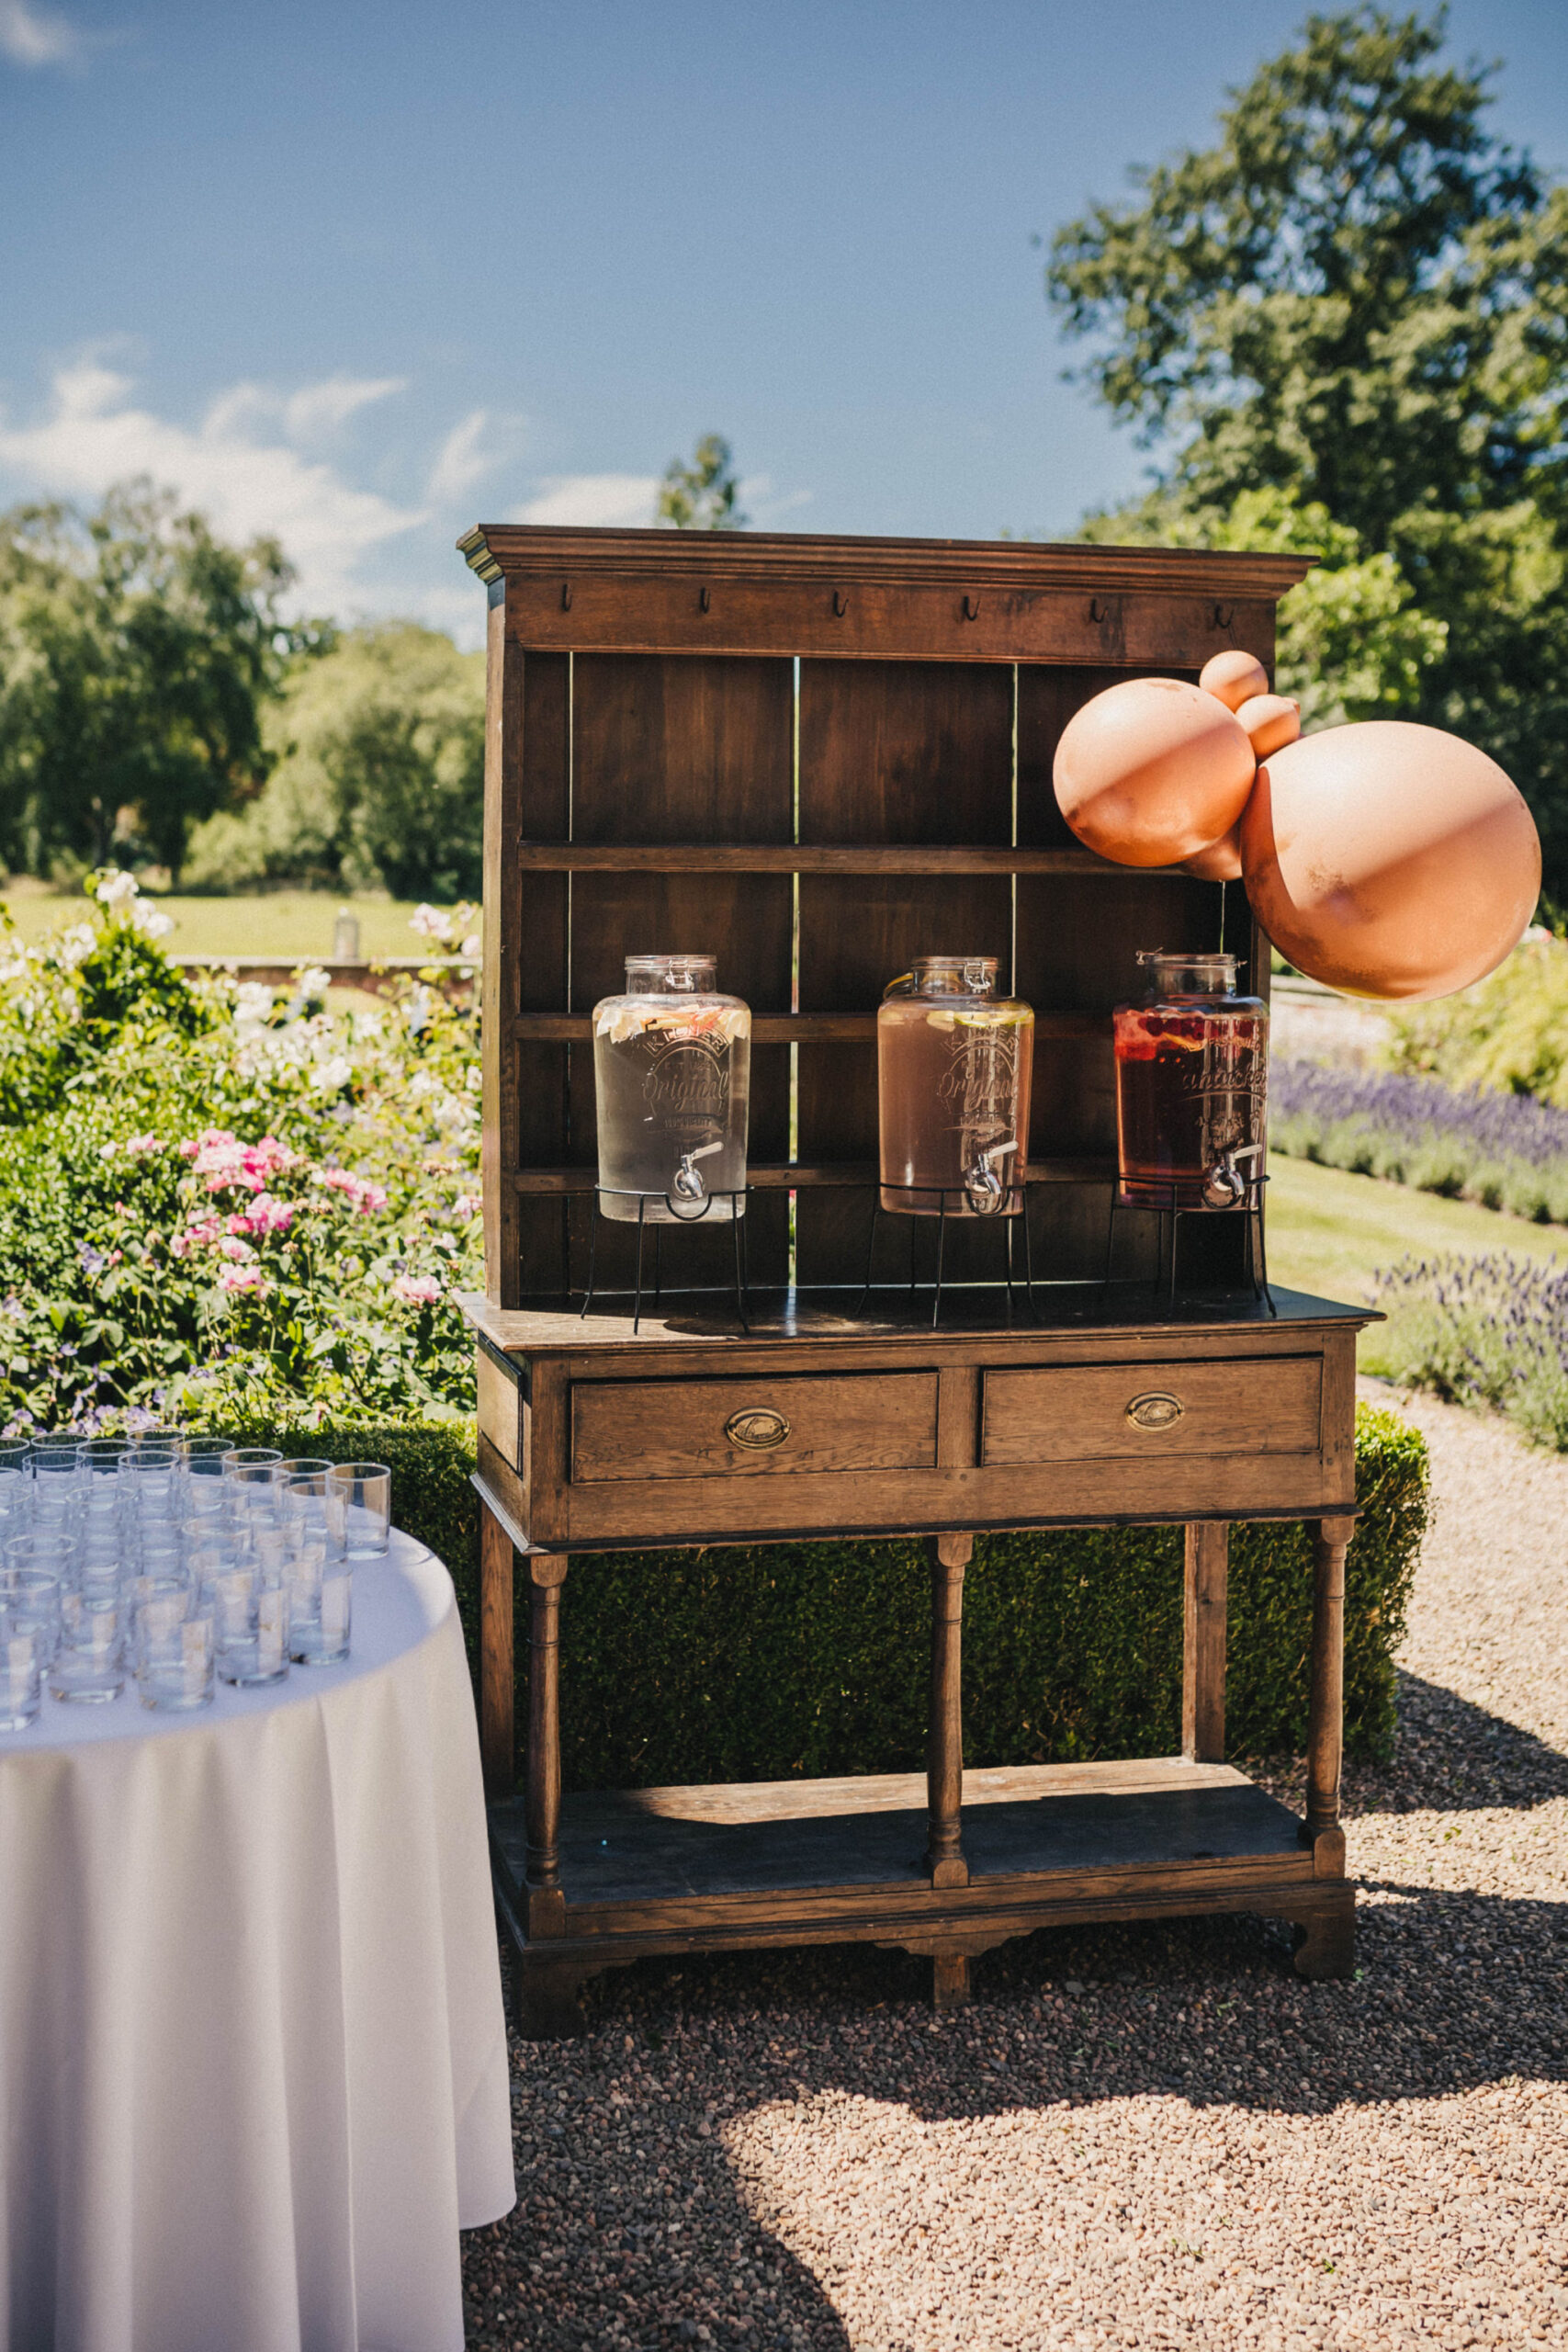 An old welsh wooden dresser has been repurposed as a bar for an outside wedding with glasses set up on it and decanters filled with drinks